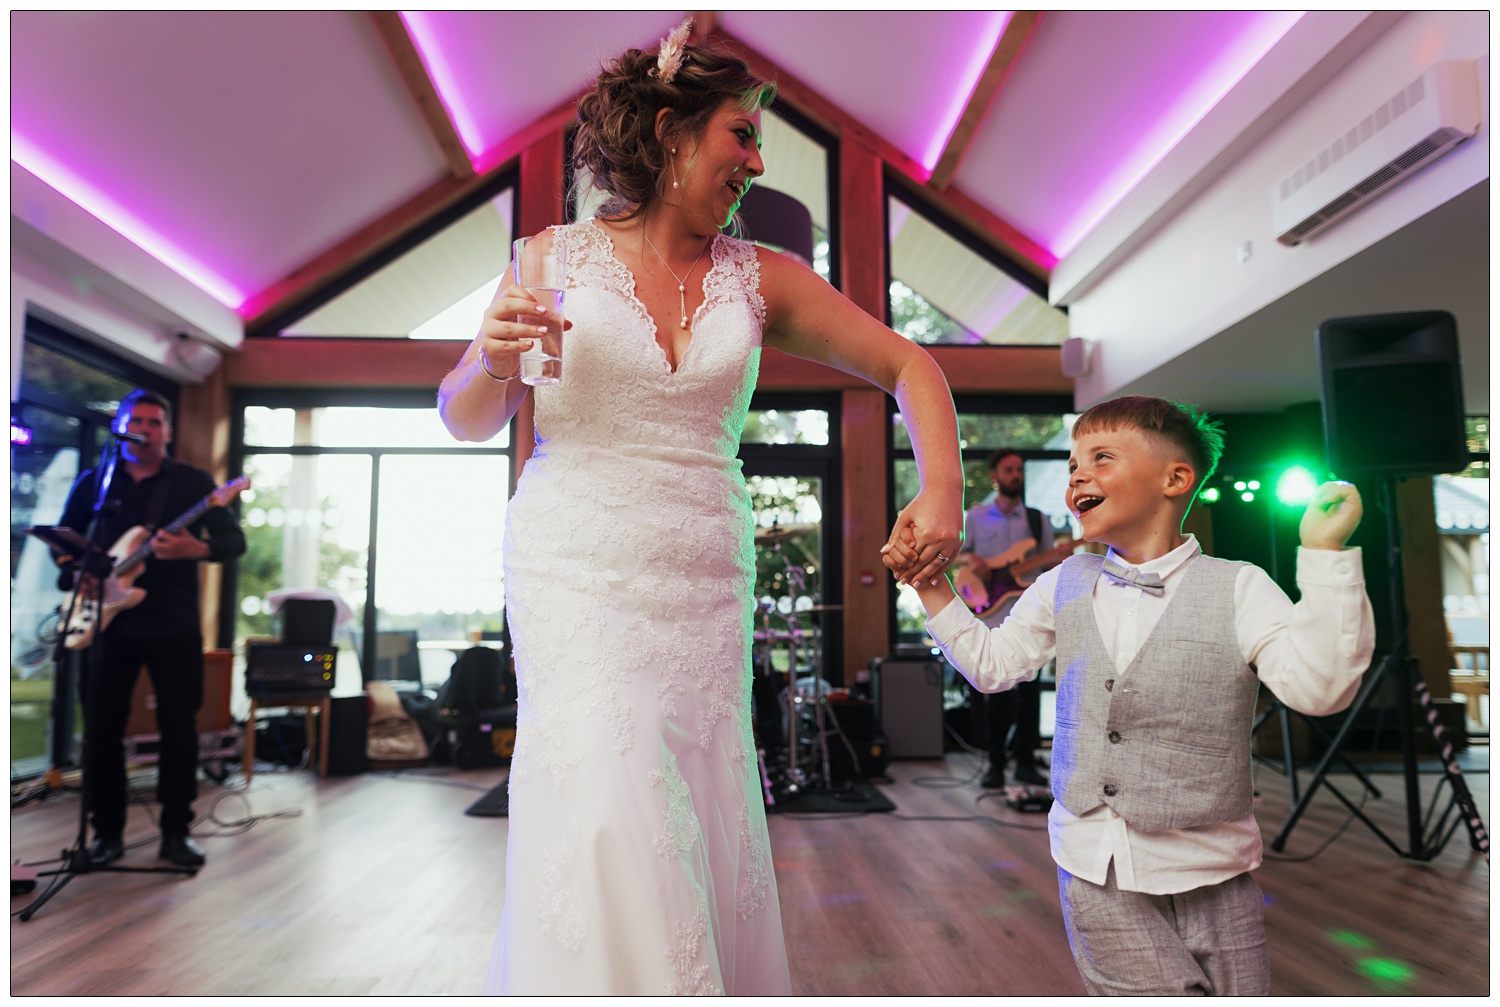 A woman in a lace wedding dress is holding a drink and her nephew's hand. They are dancing at a wedding reception, the lighting is pink and a band are playing behind them.